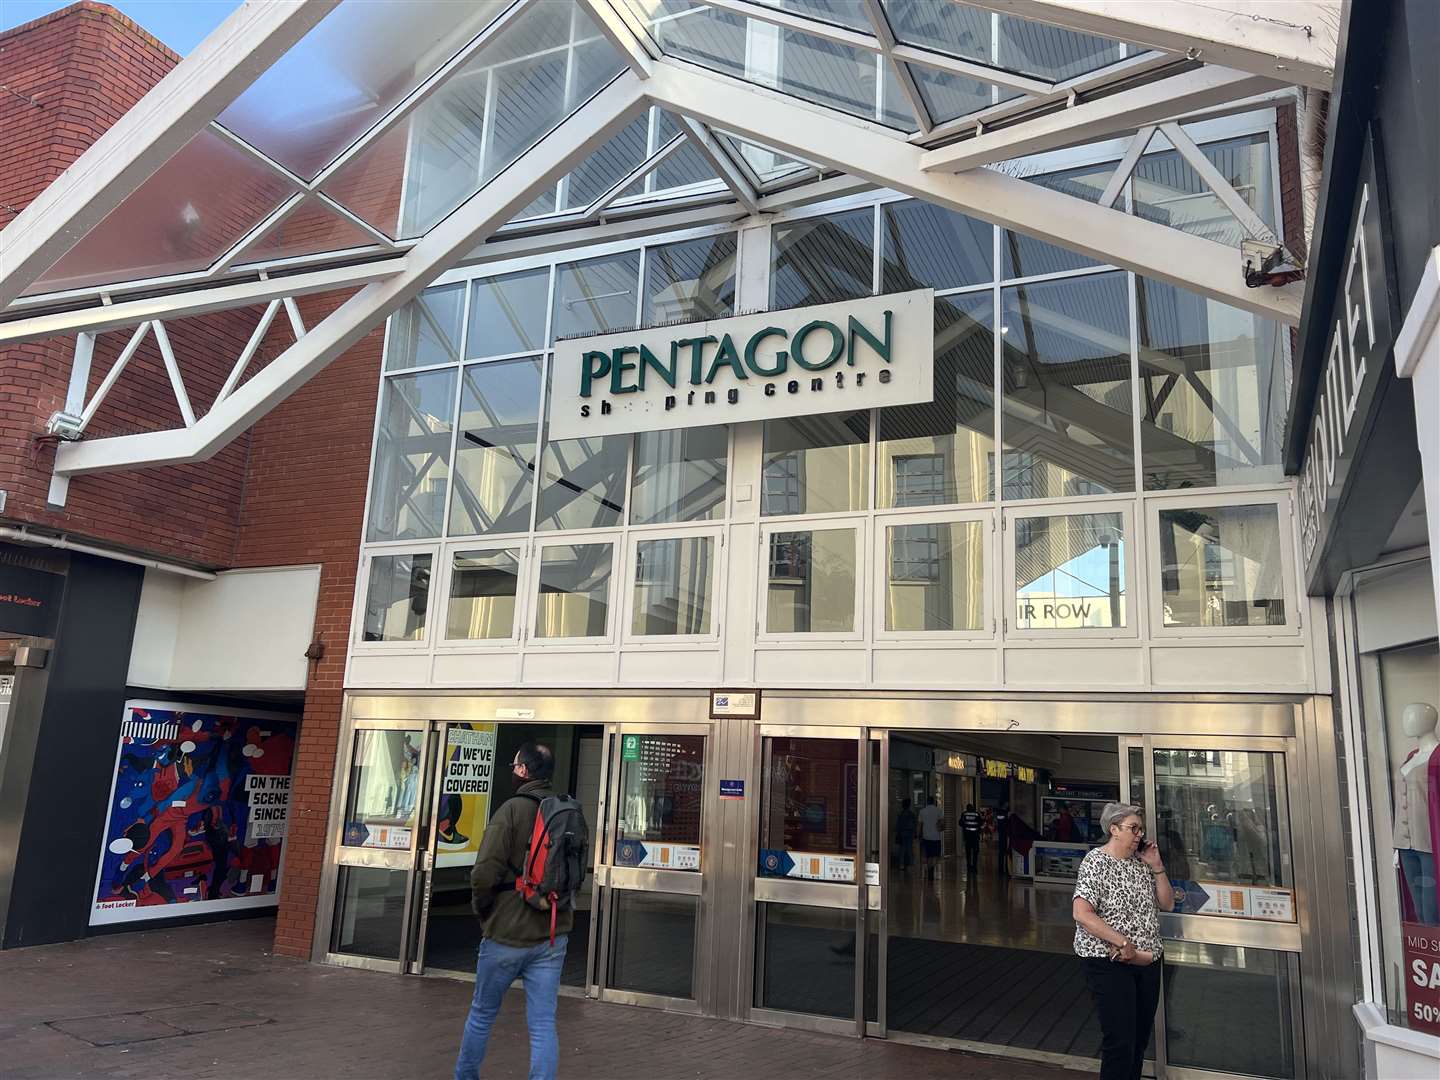 Parents can get their children pictured for the competition at The Pentagon shopping centre in Chatham